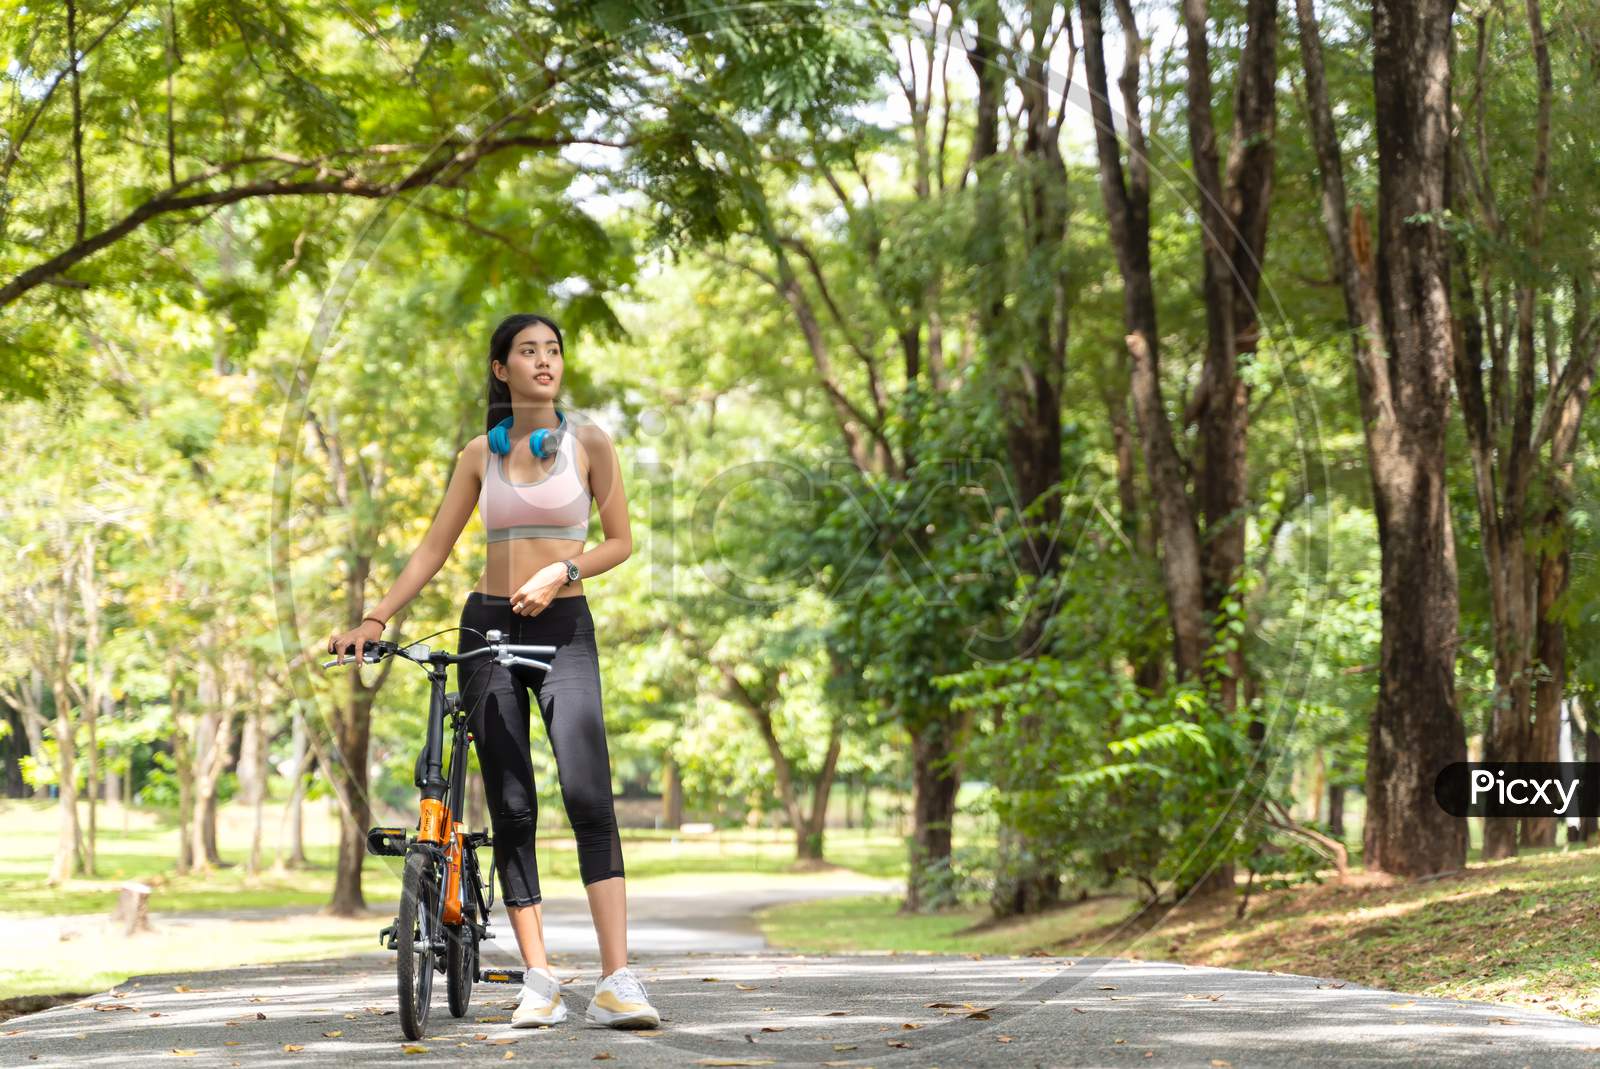 Healthy Asian Women With Headphones On The Neck Are Ride Bike In The Garden During Workout At The Park With Blur Bokeh Background In Sport And Healthy Concept With Copy Space.